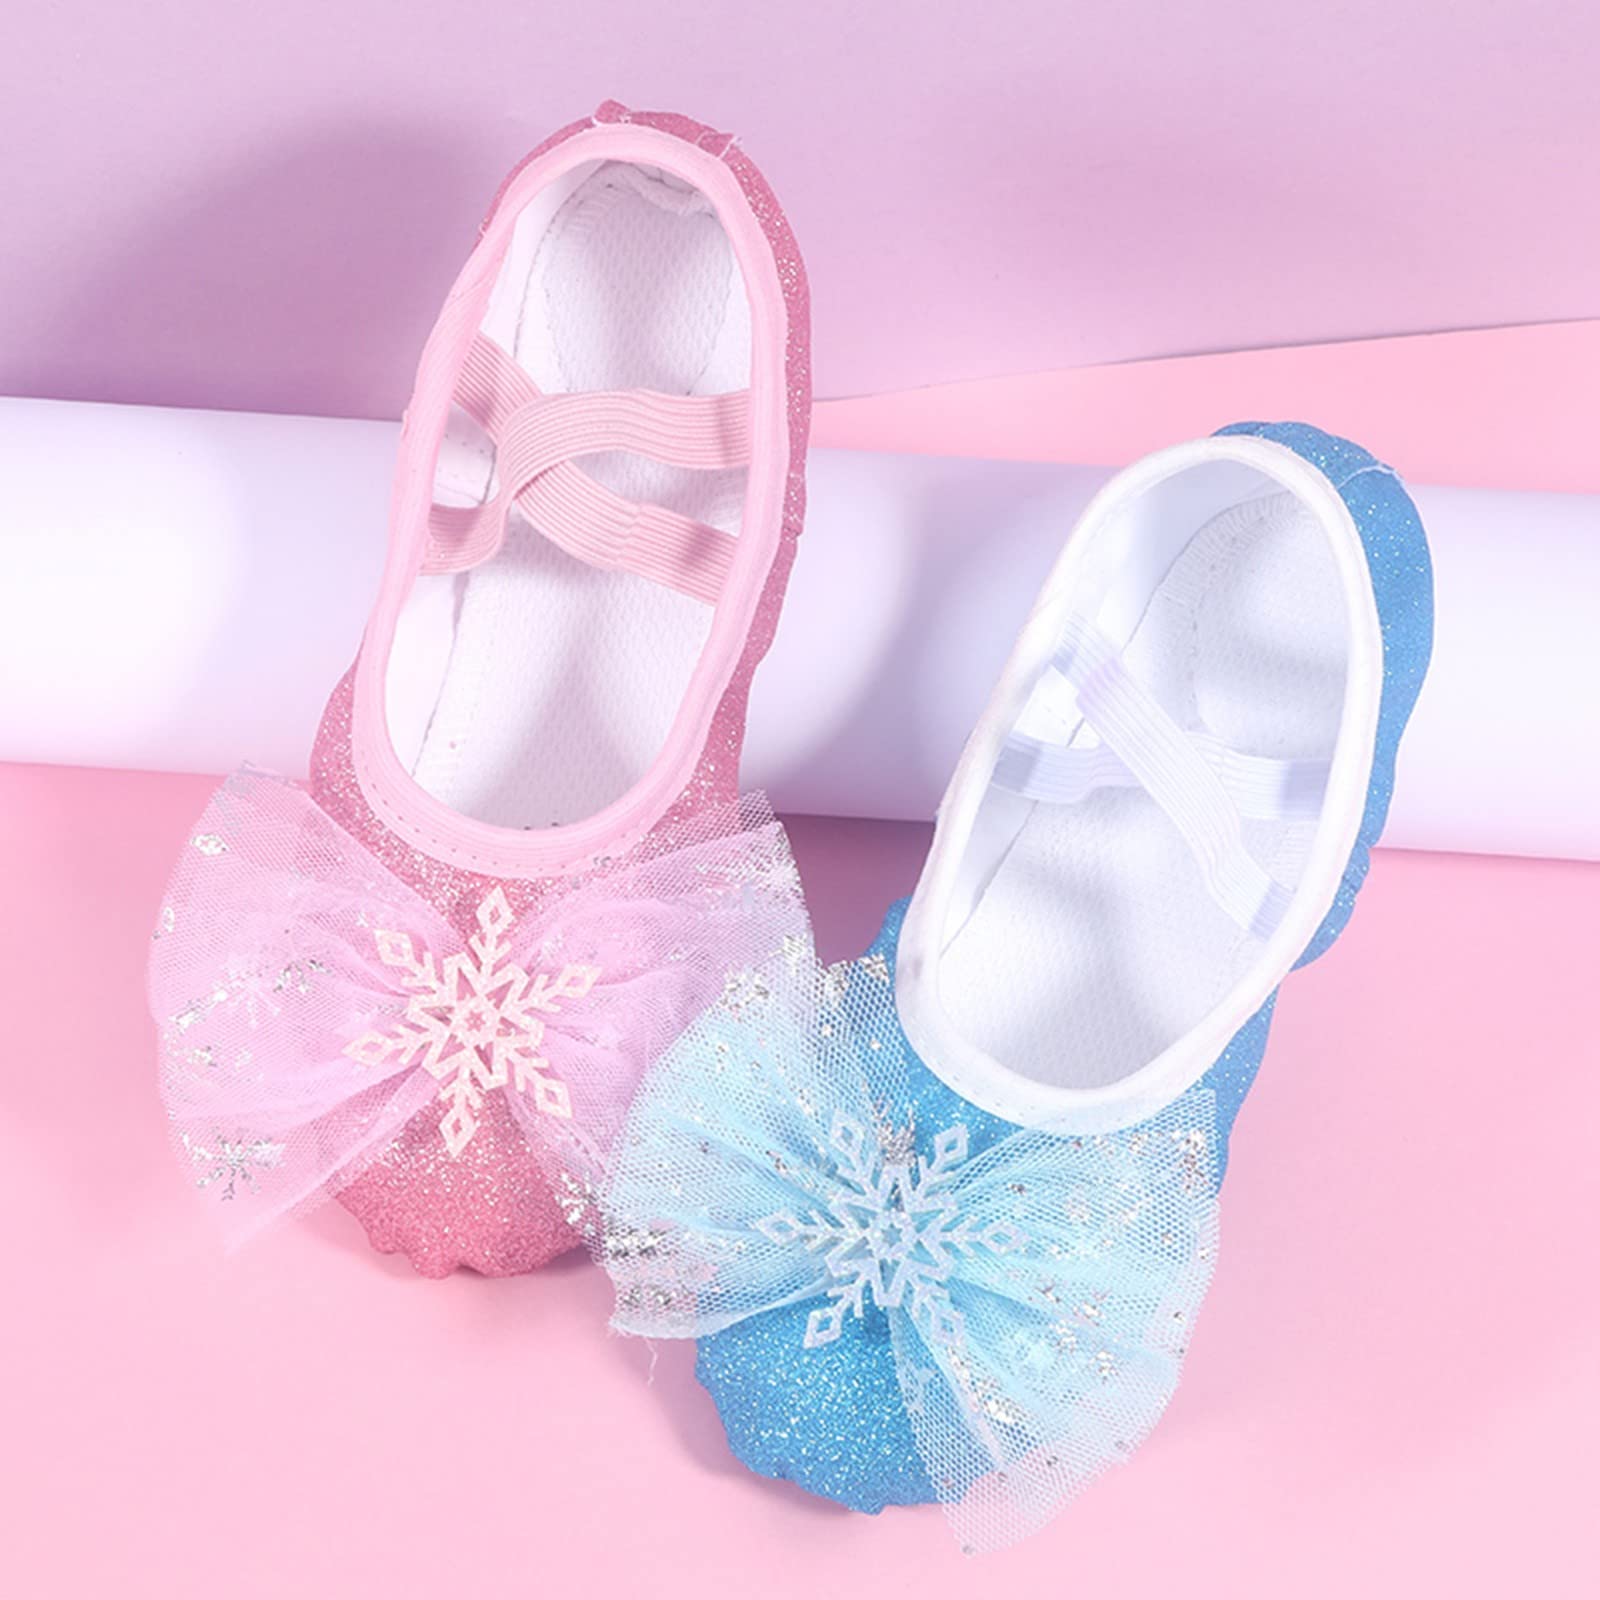 TODOZO Children Shoes Dance Shoes Warm Dance Ballet Performance Indoor Shoes Yoga Dance Shoes Kids Toddler Shoes Girls